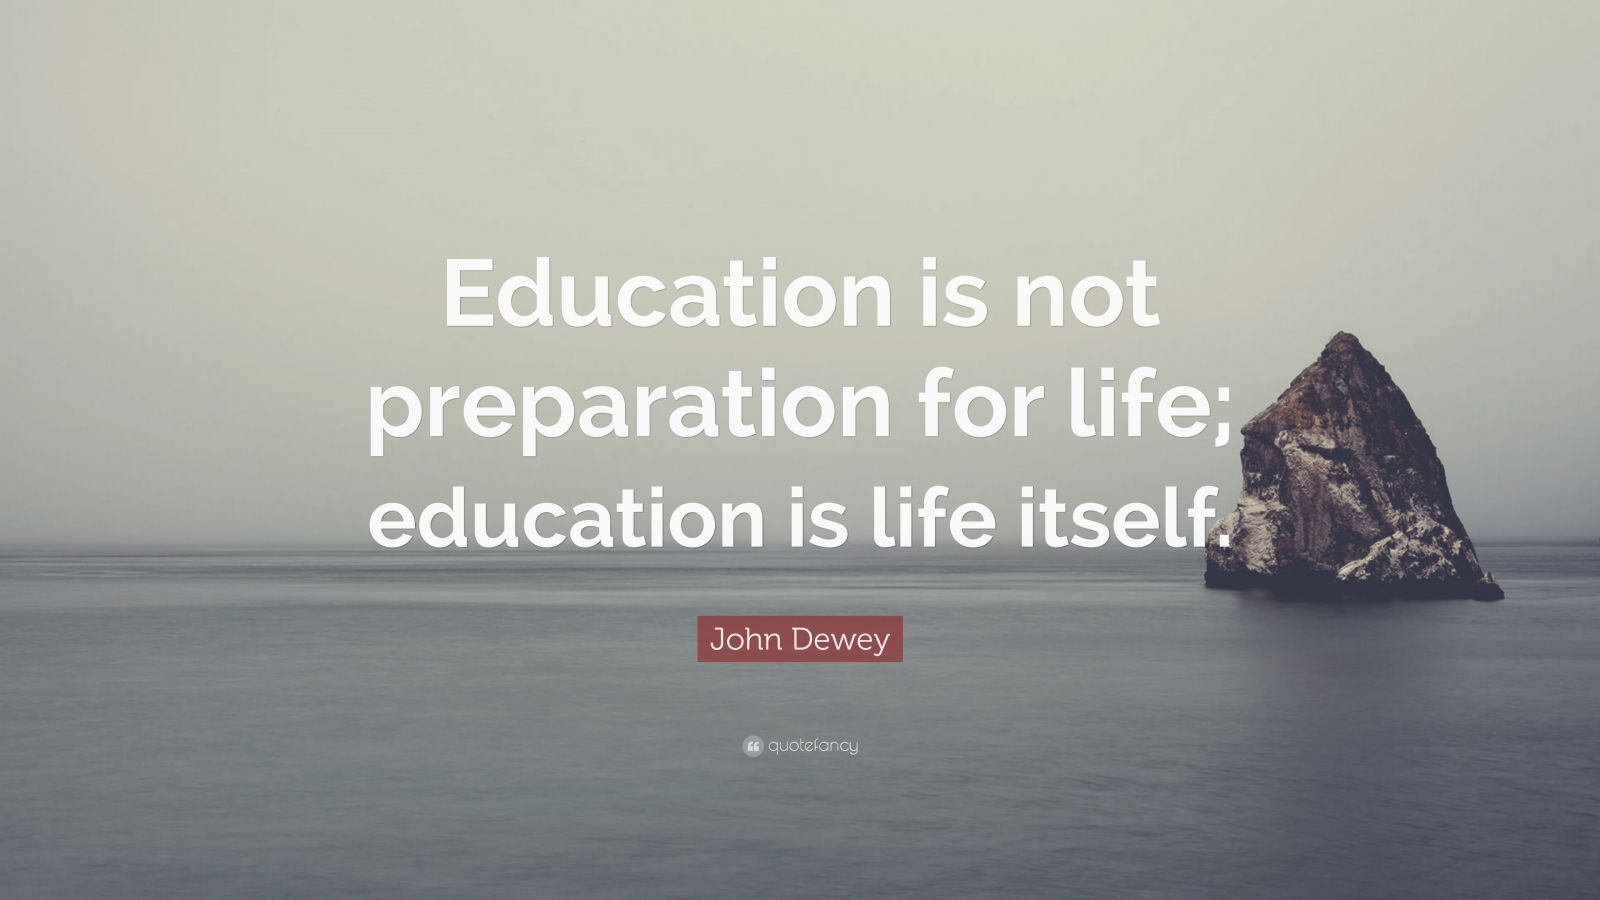 John Dewey Quote: “Education is not preparation for life; education is ...